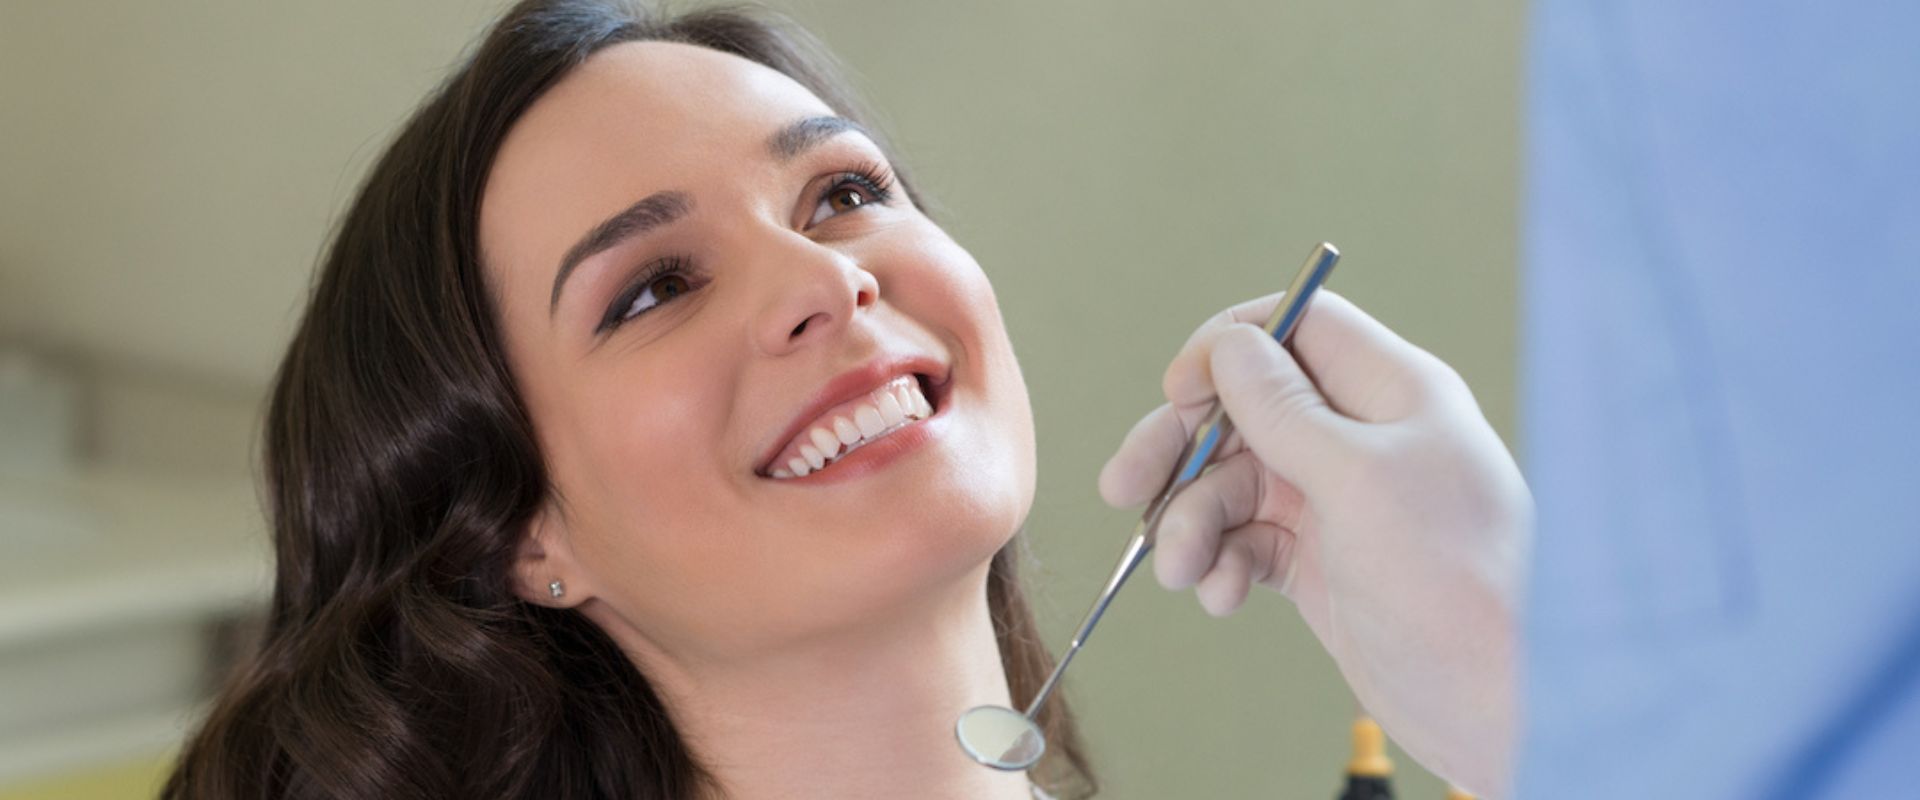 woman smiles at orthodontist at her first orthodontist appointment